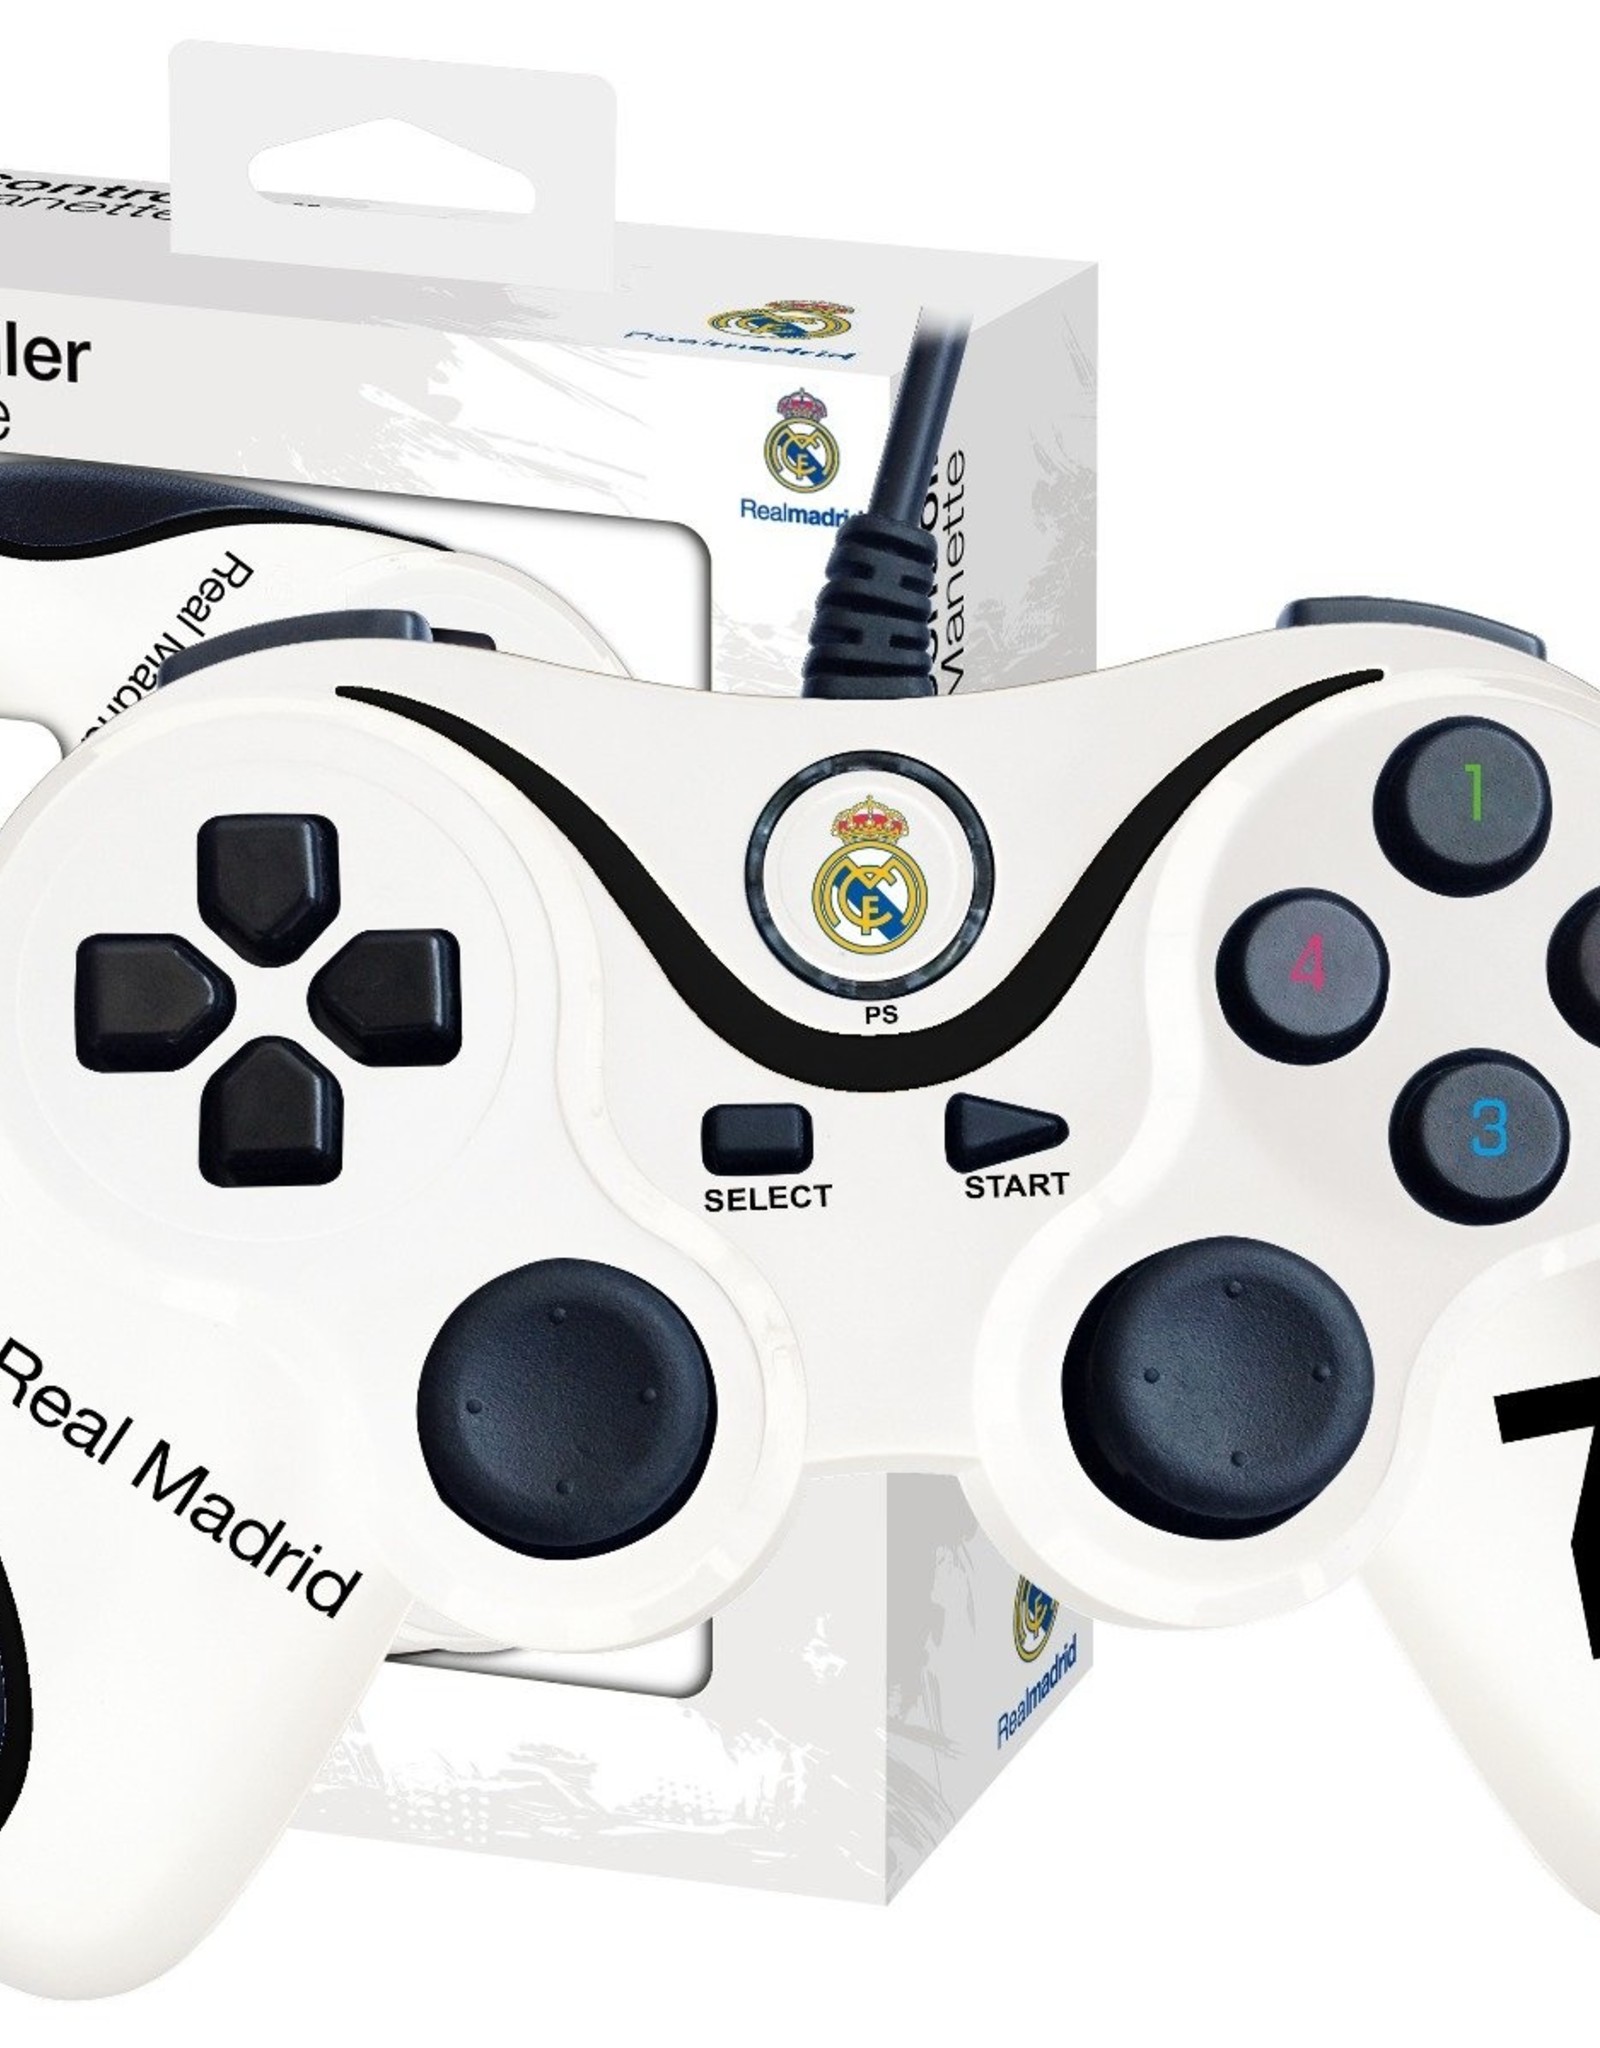 Subsonic Subsonic Real Madrid PS3 wired joypad